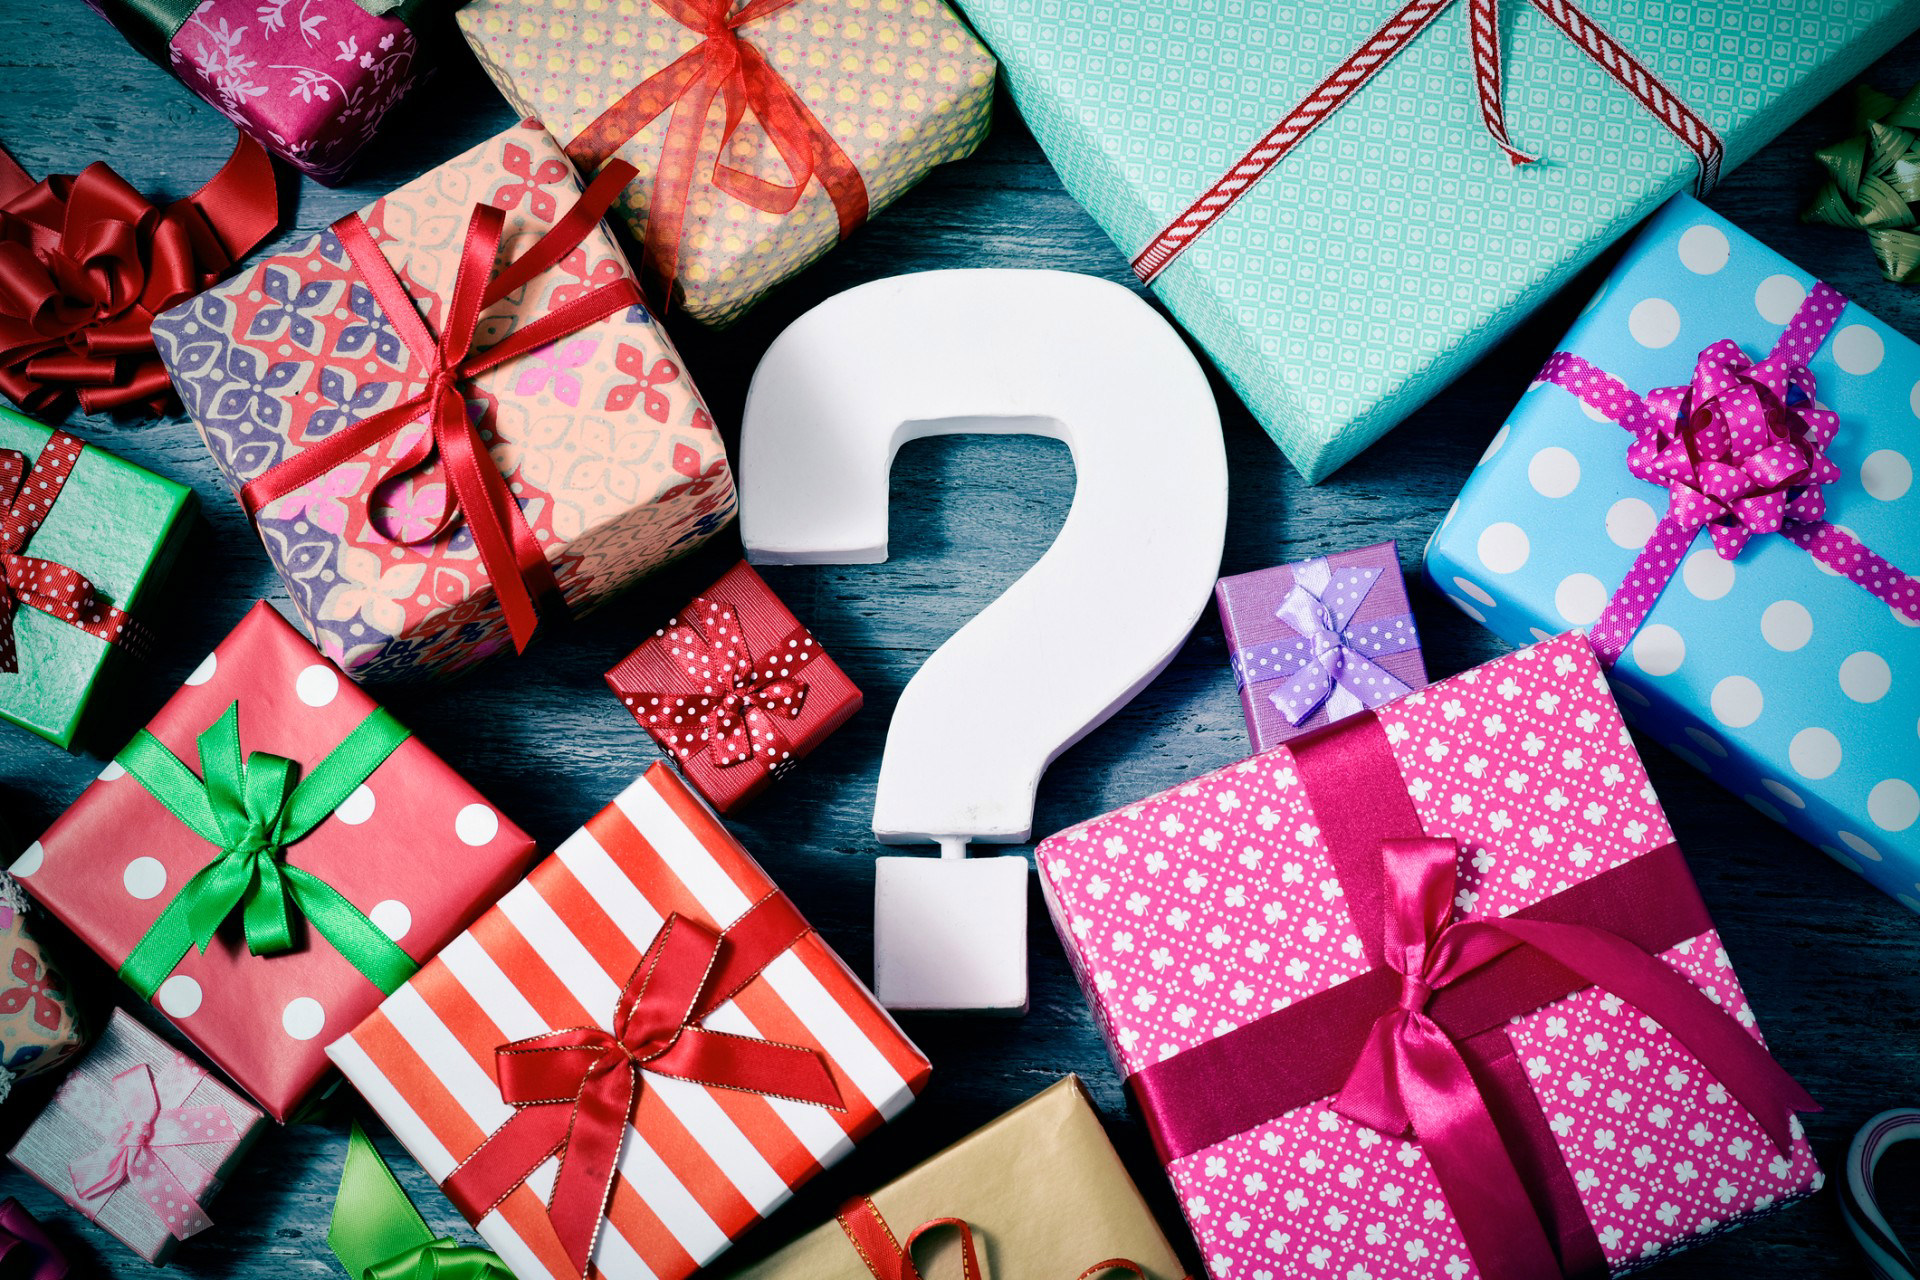 christmas-quiz-questions-12-questions-to-test-your-festive-knowledge